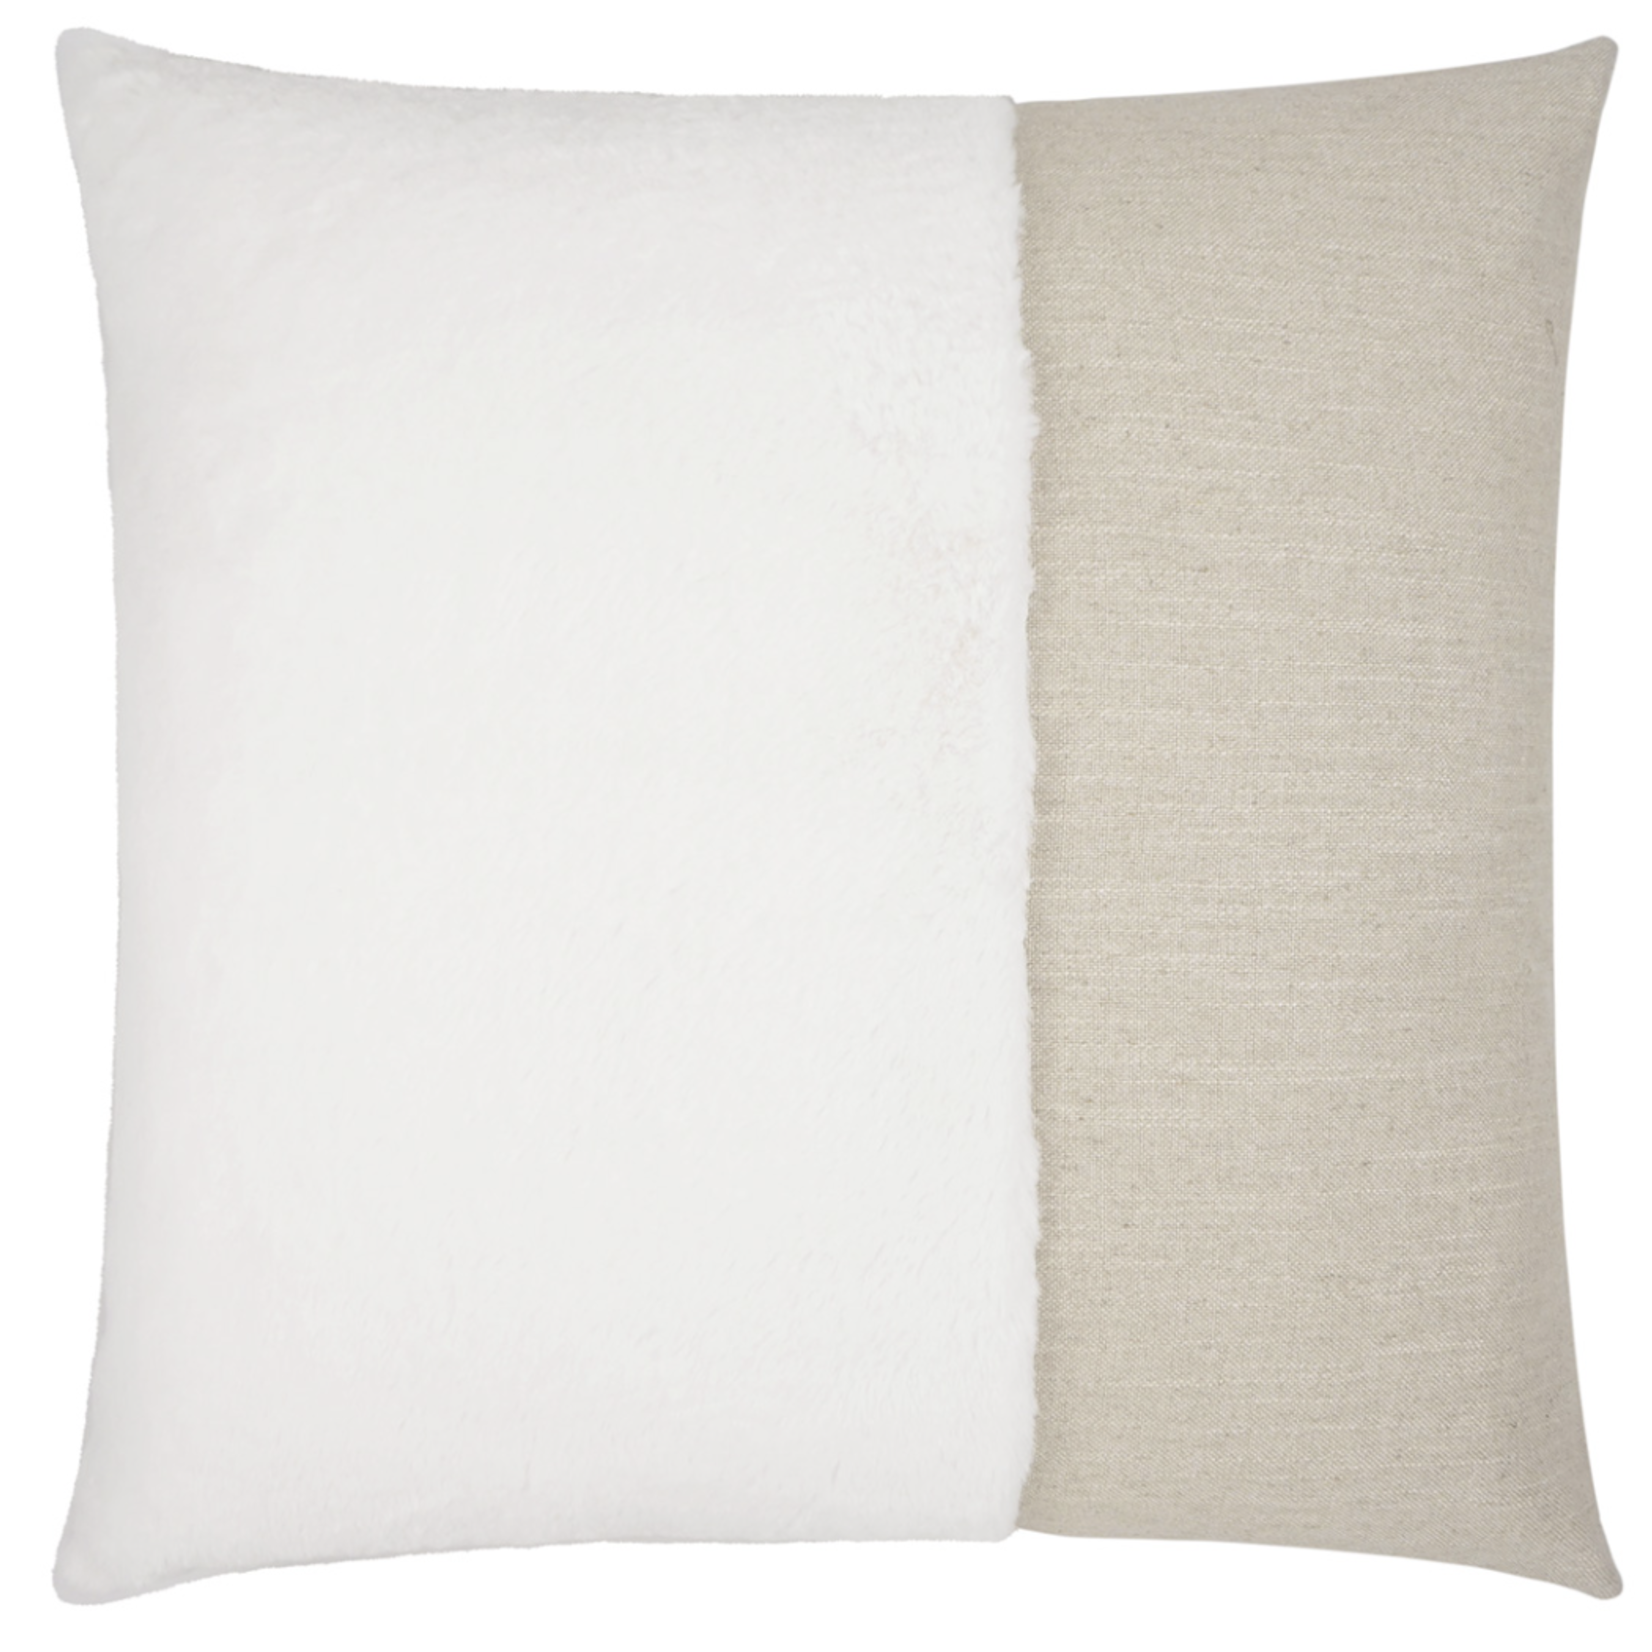 Outside The Box 24x24 St. Moritz Feather Down Pillow In Swan